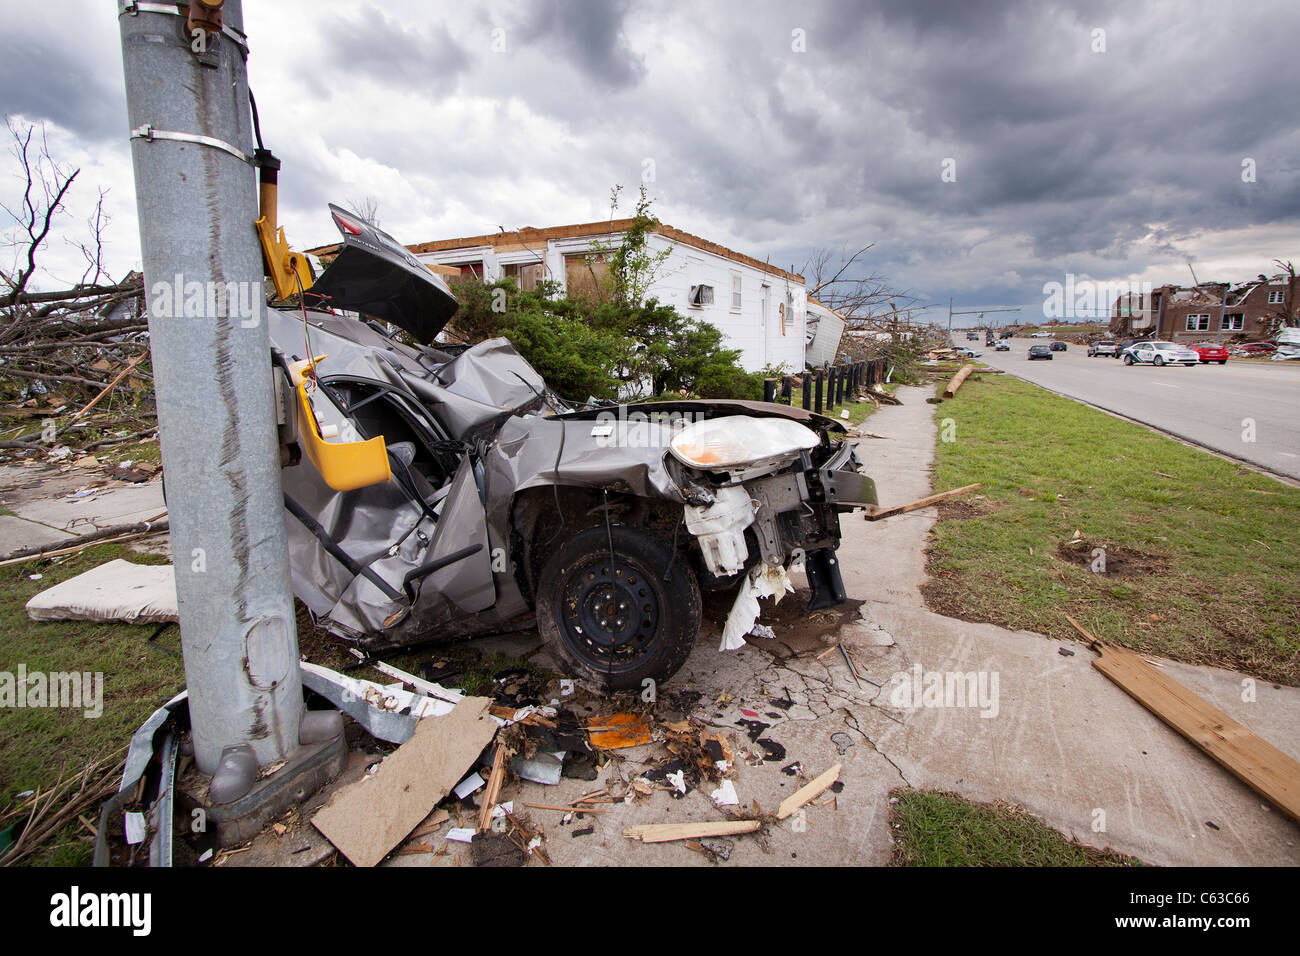 A car wrapped around a traffic signal in Joplin, Missouri, May 25, 2011. Stock Photo